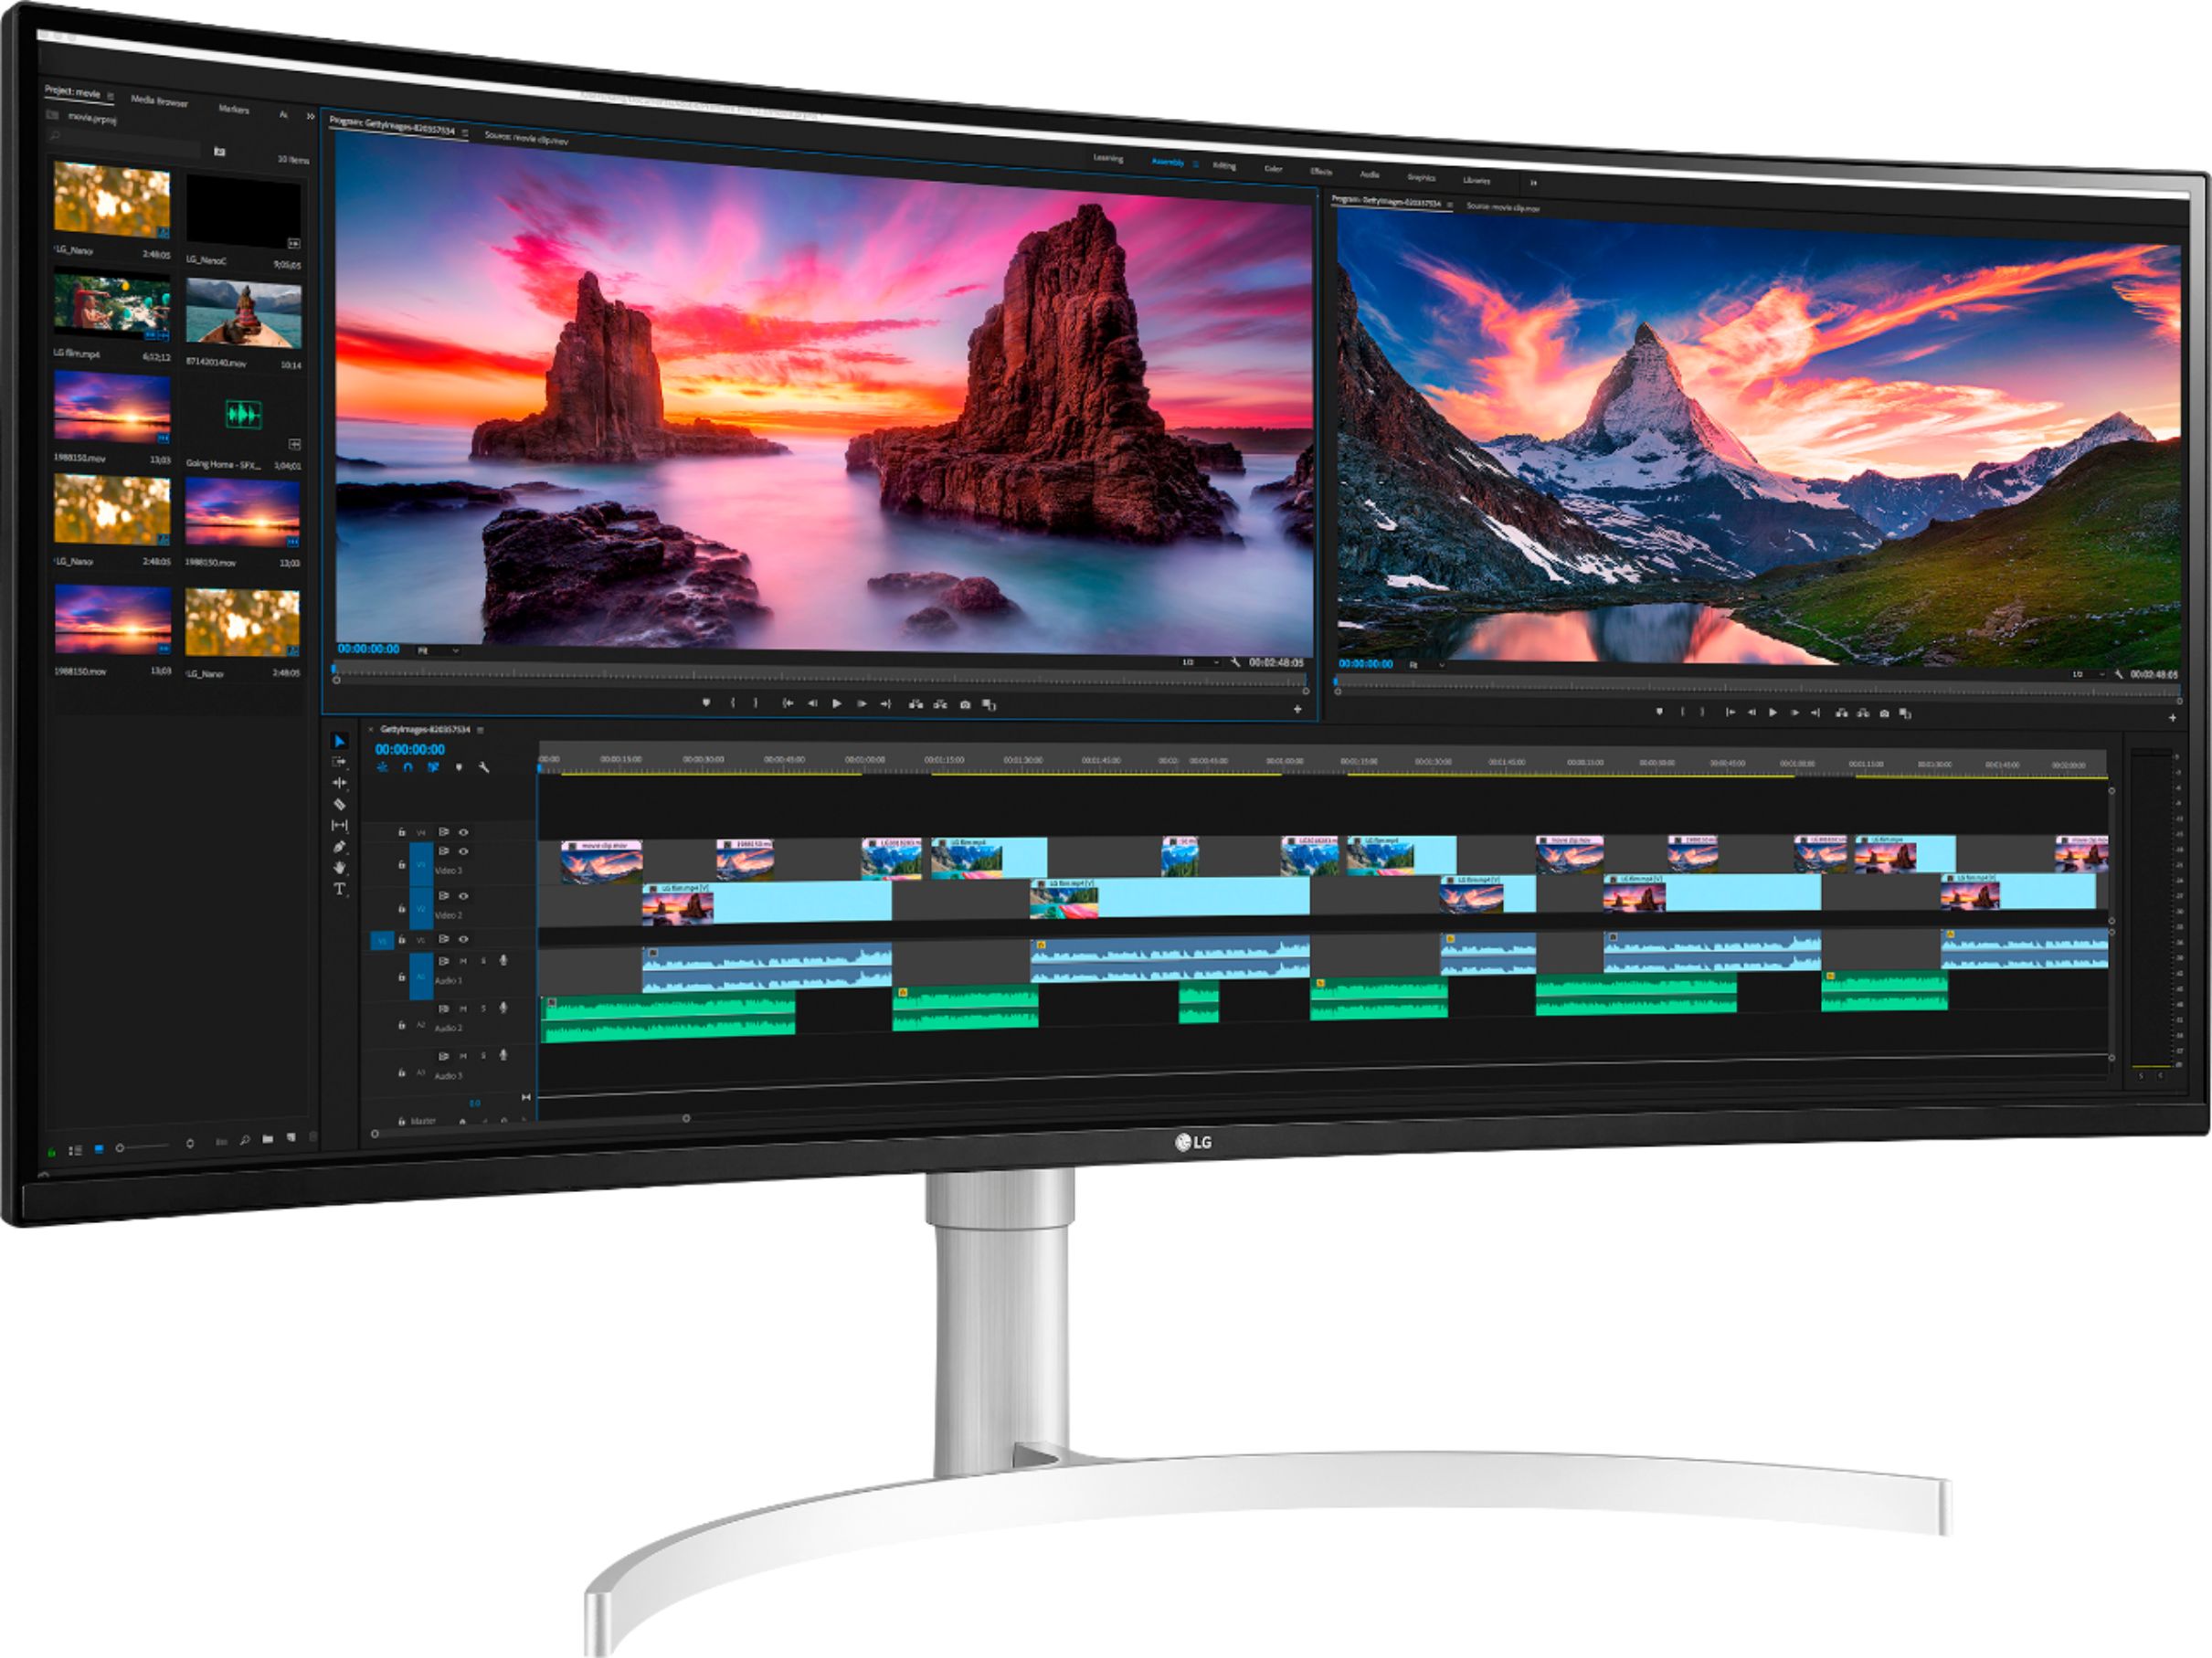 Angle View: LG - Geek Squad Certified Refurbished 38" IPS LED Curved FreeSync and G-SYNC Compatible Monitor with HDR - Silver